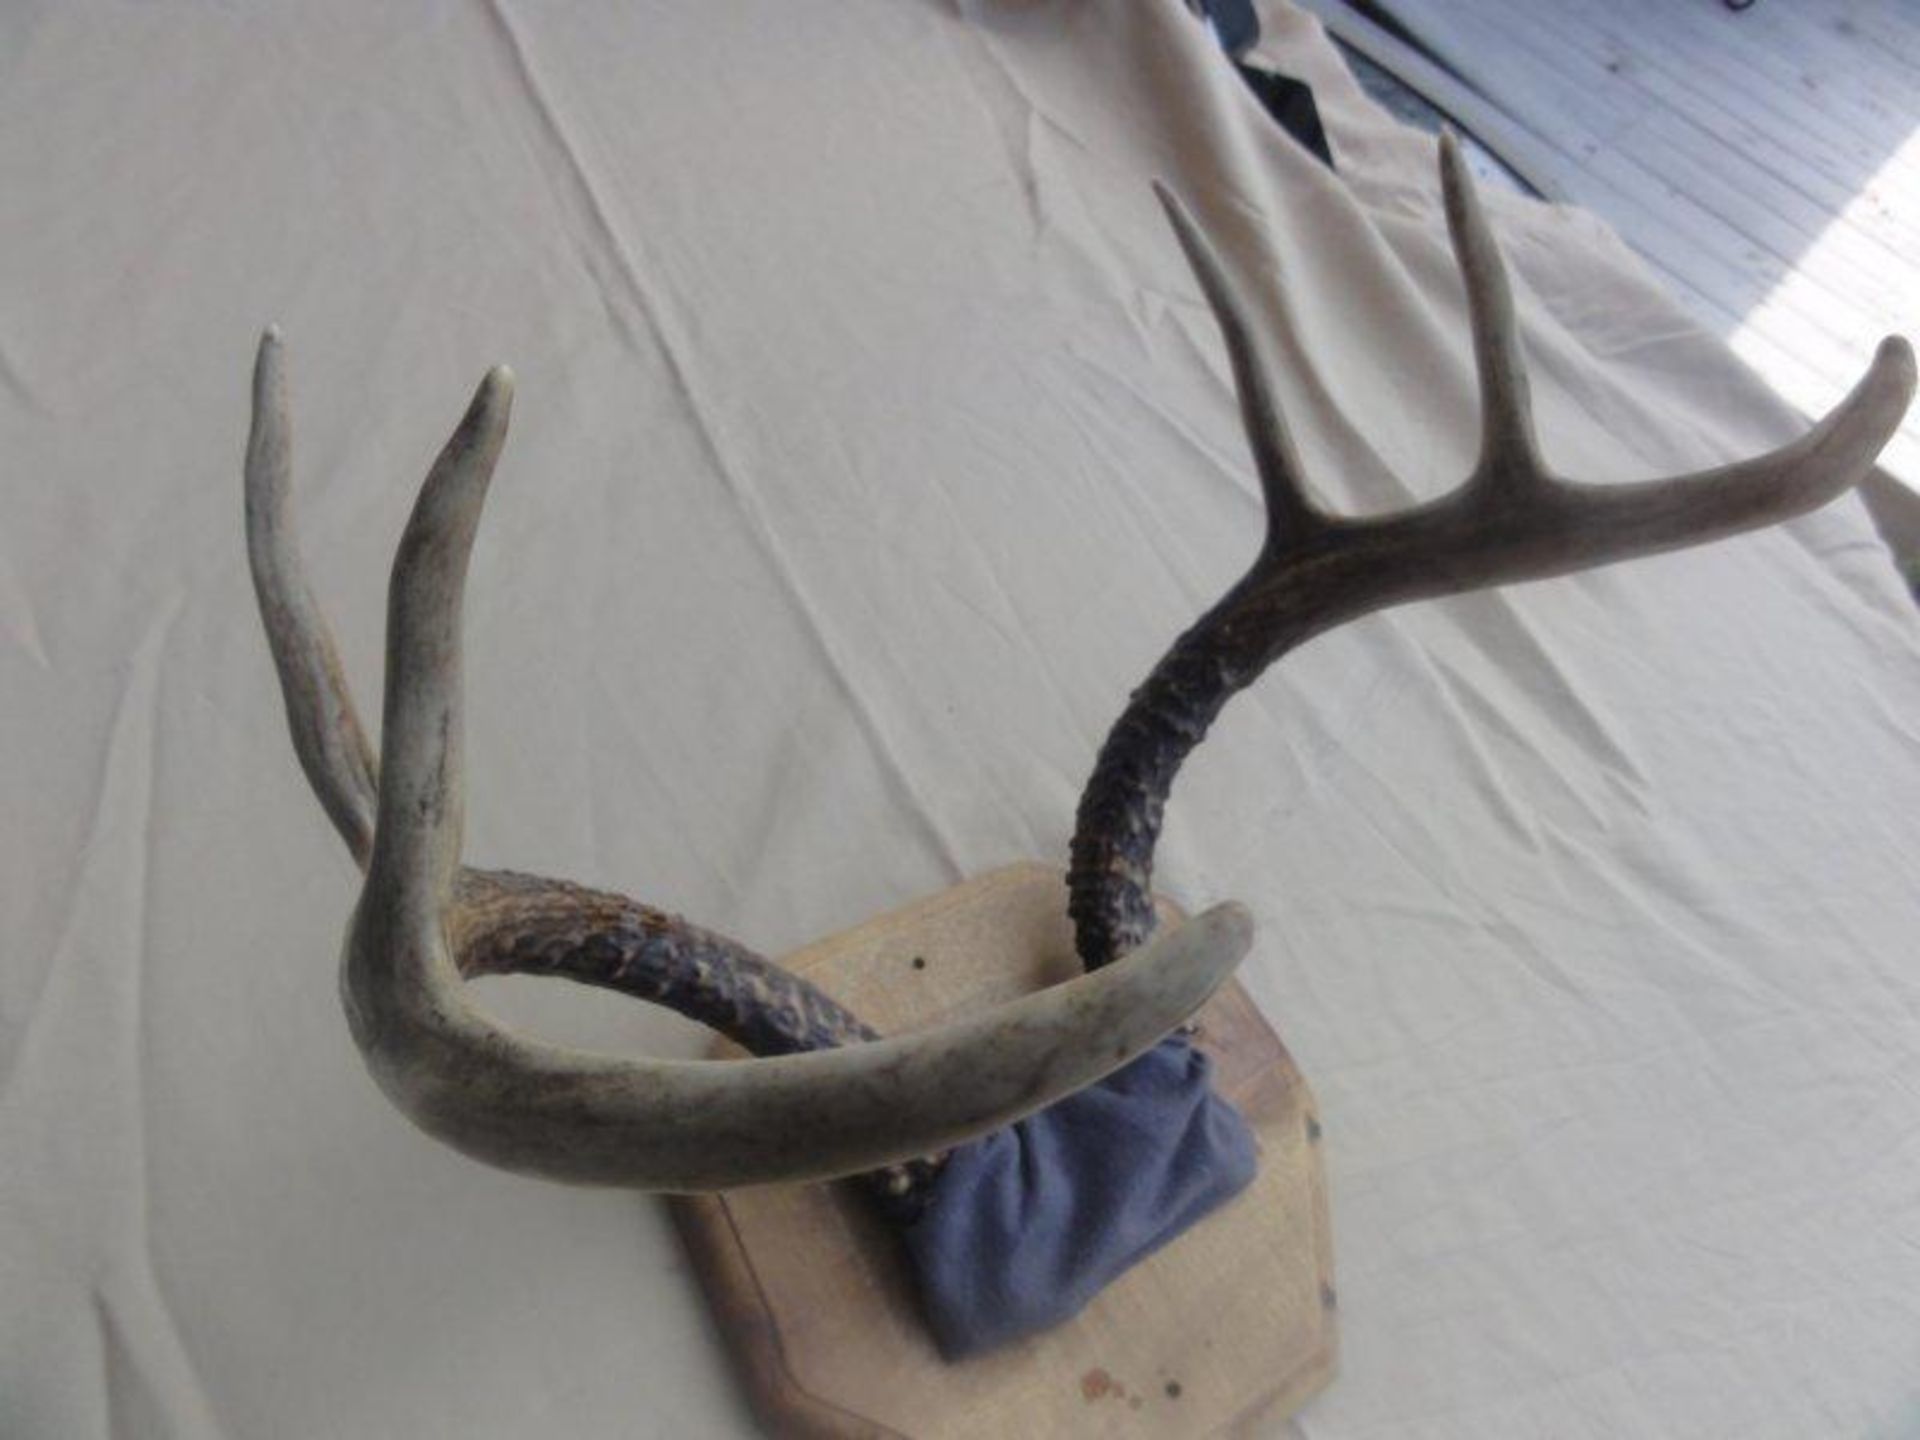 6-Point Antler Mount. Overall Great Condition - Image 2 of 3